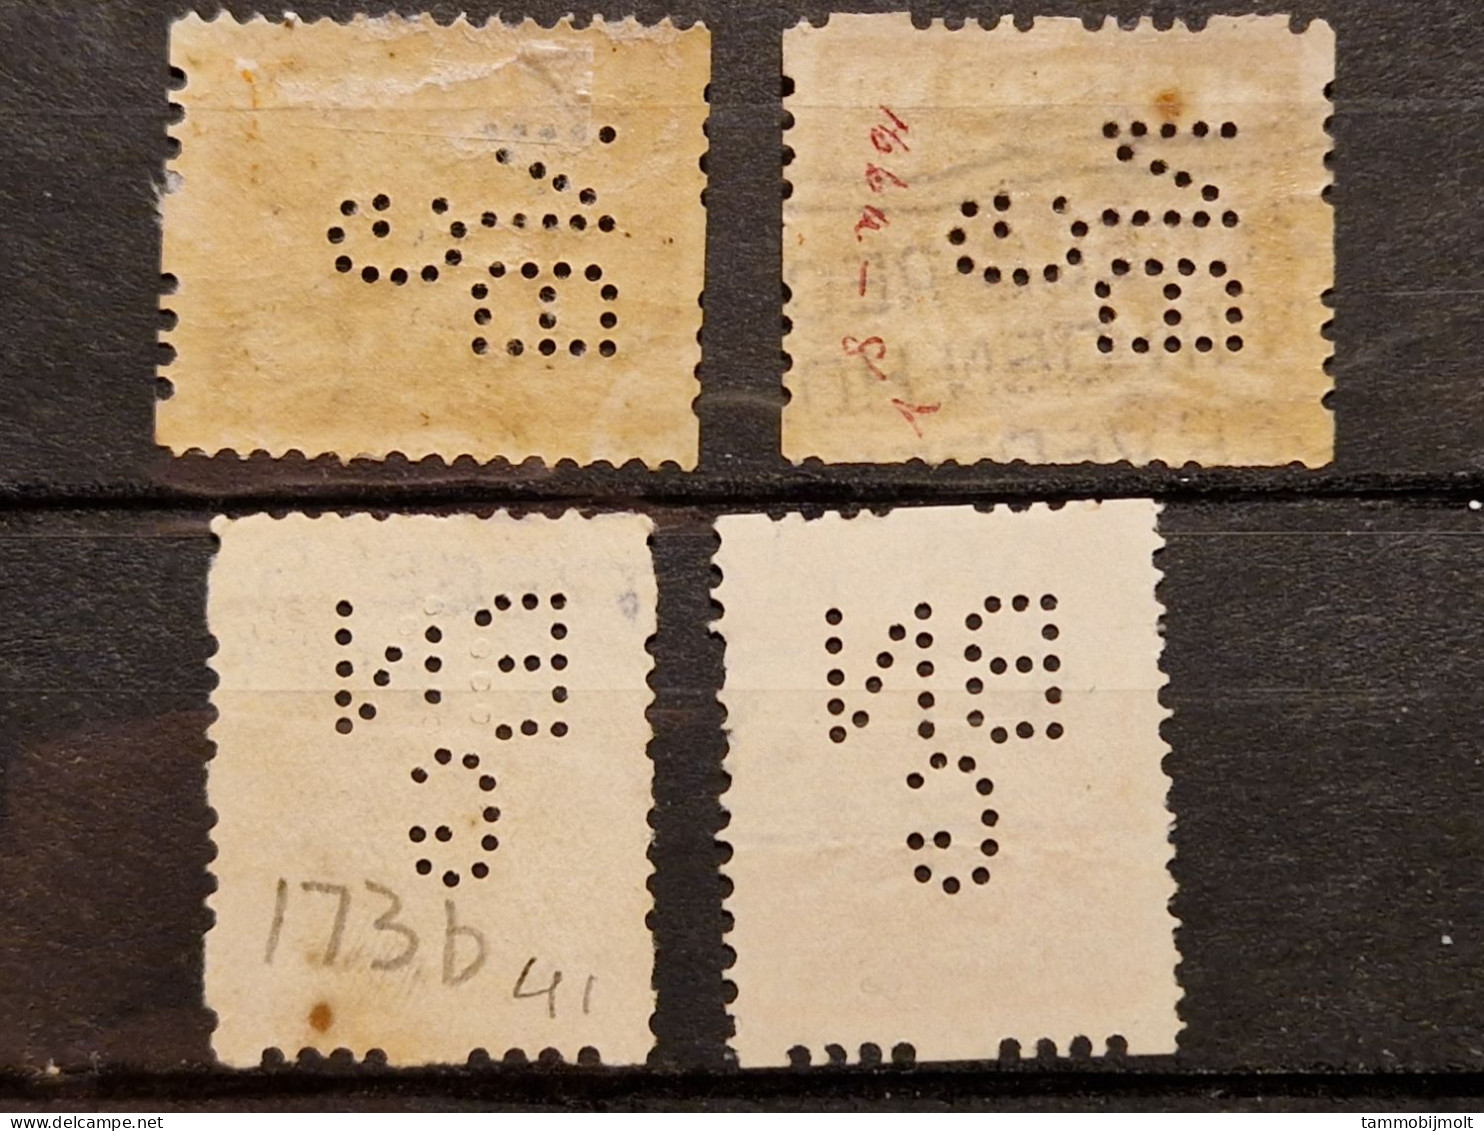 Netherlands, Nederland; Roltanding; POKO Perfins BNG; 4 Different Stamps - Unclassified